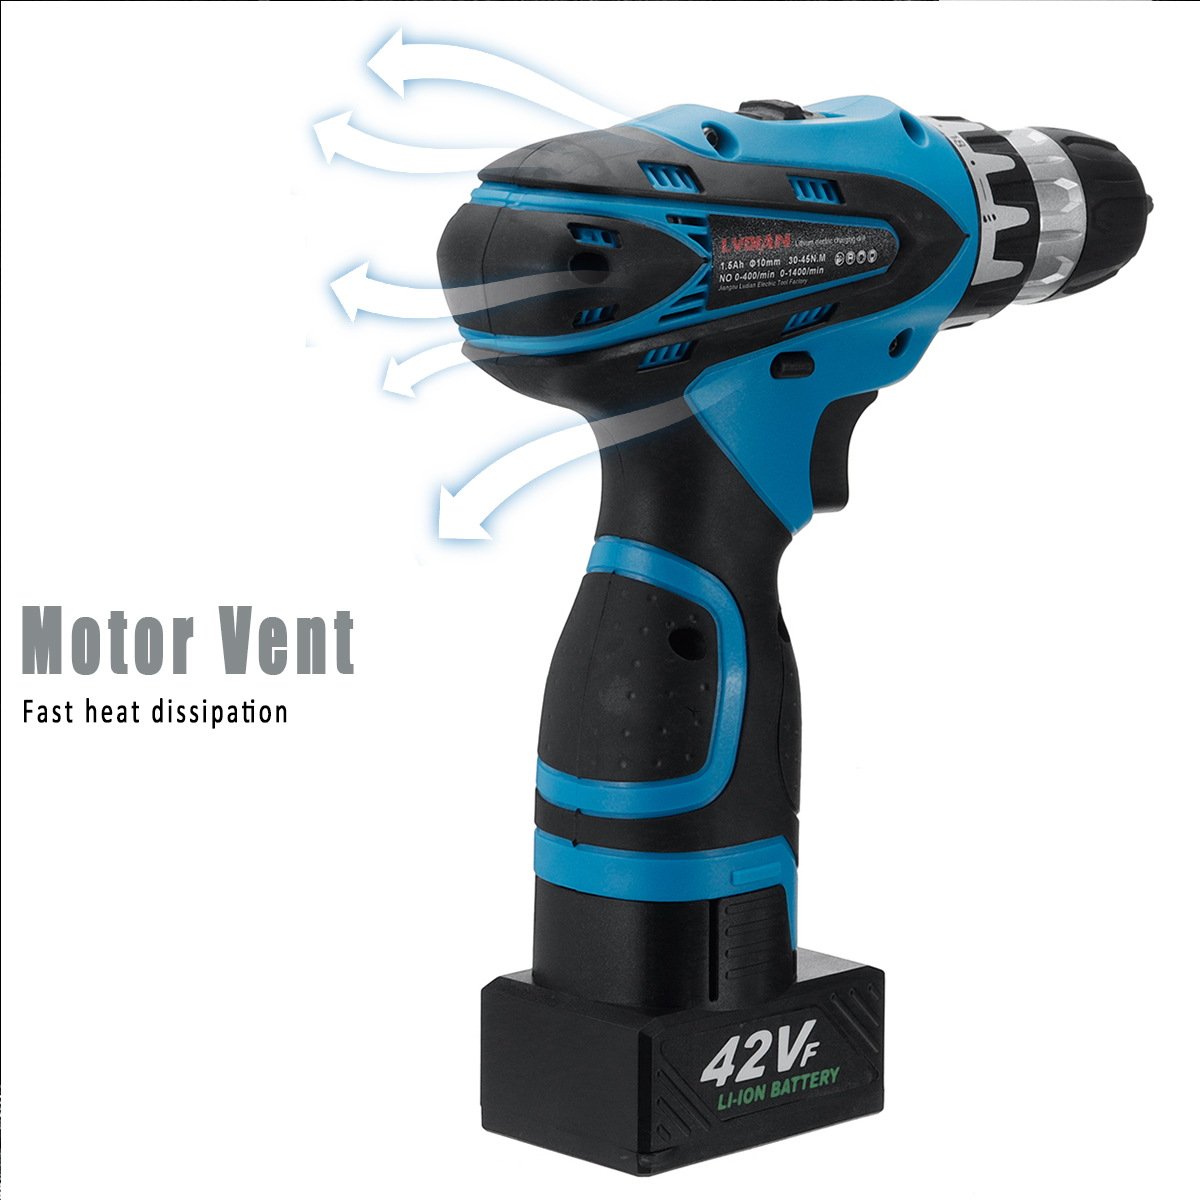 42V-9000mAh-Electric-Cordless-Drill-Driver-LED-2-Speed-Screwdriver-W-1-or-2-Li-Ion-Battery-1451594-5